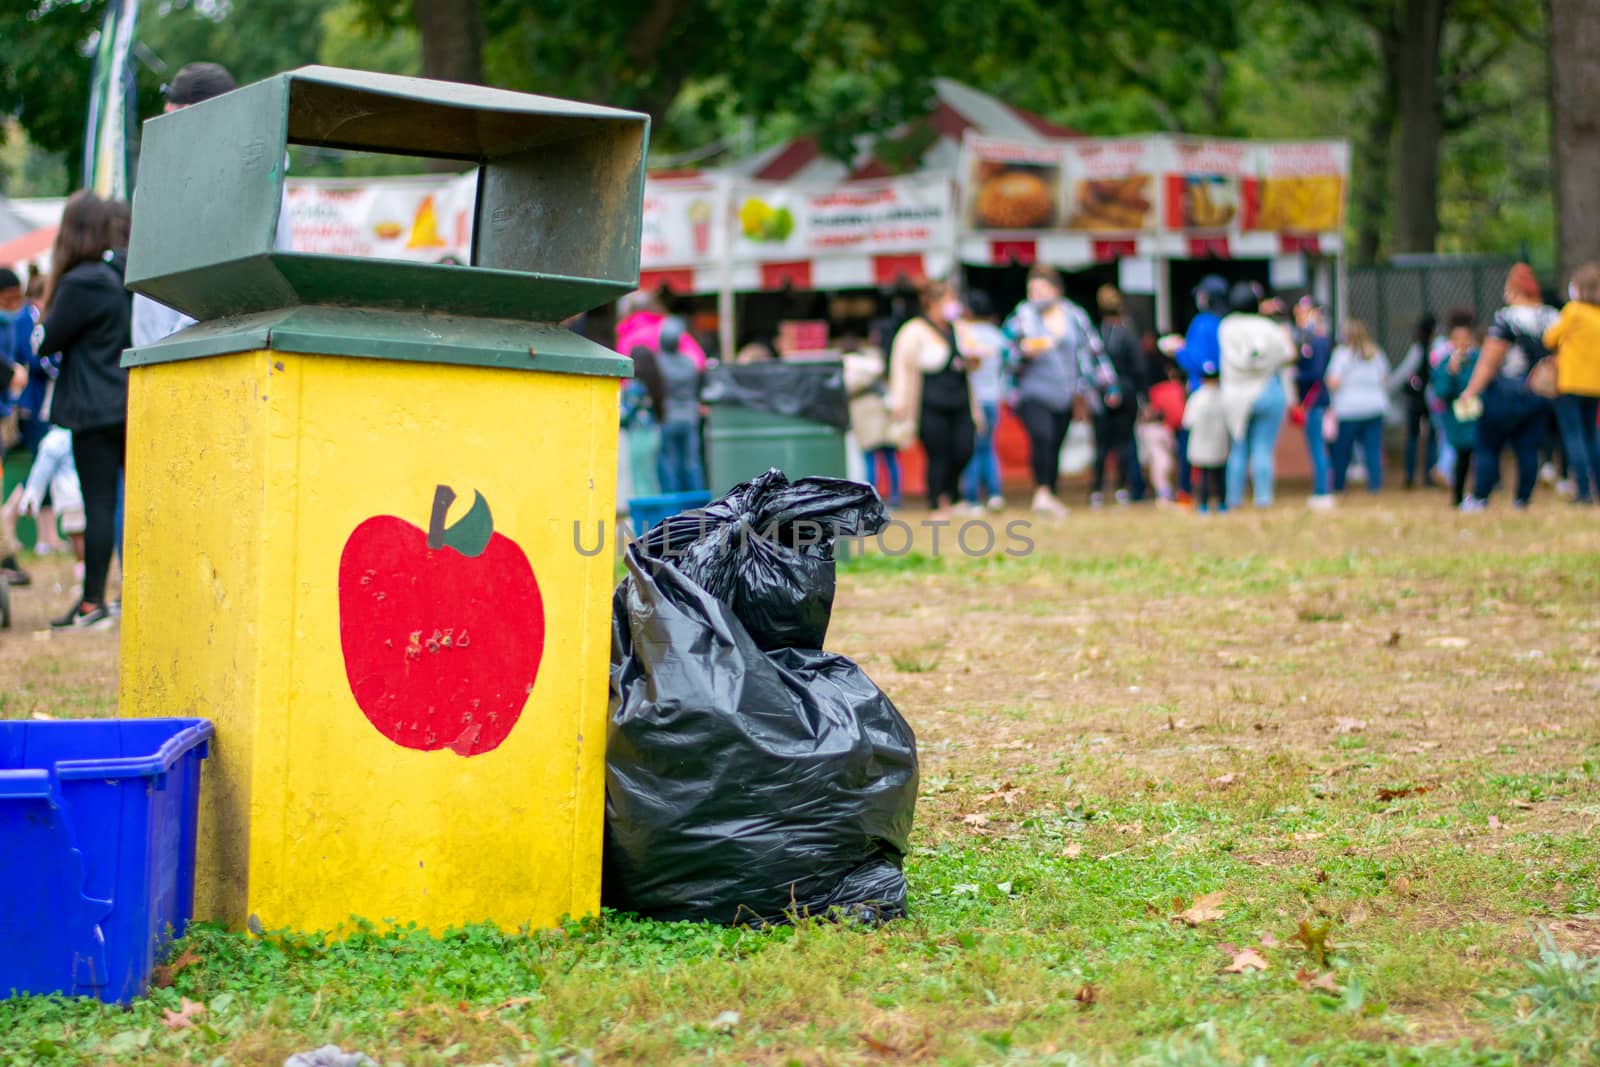 A Trash Can at a Fair With an Apple Painted on It by bju12290